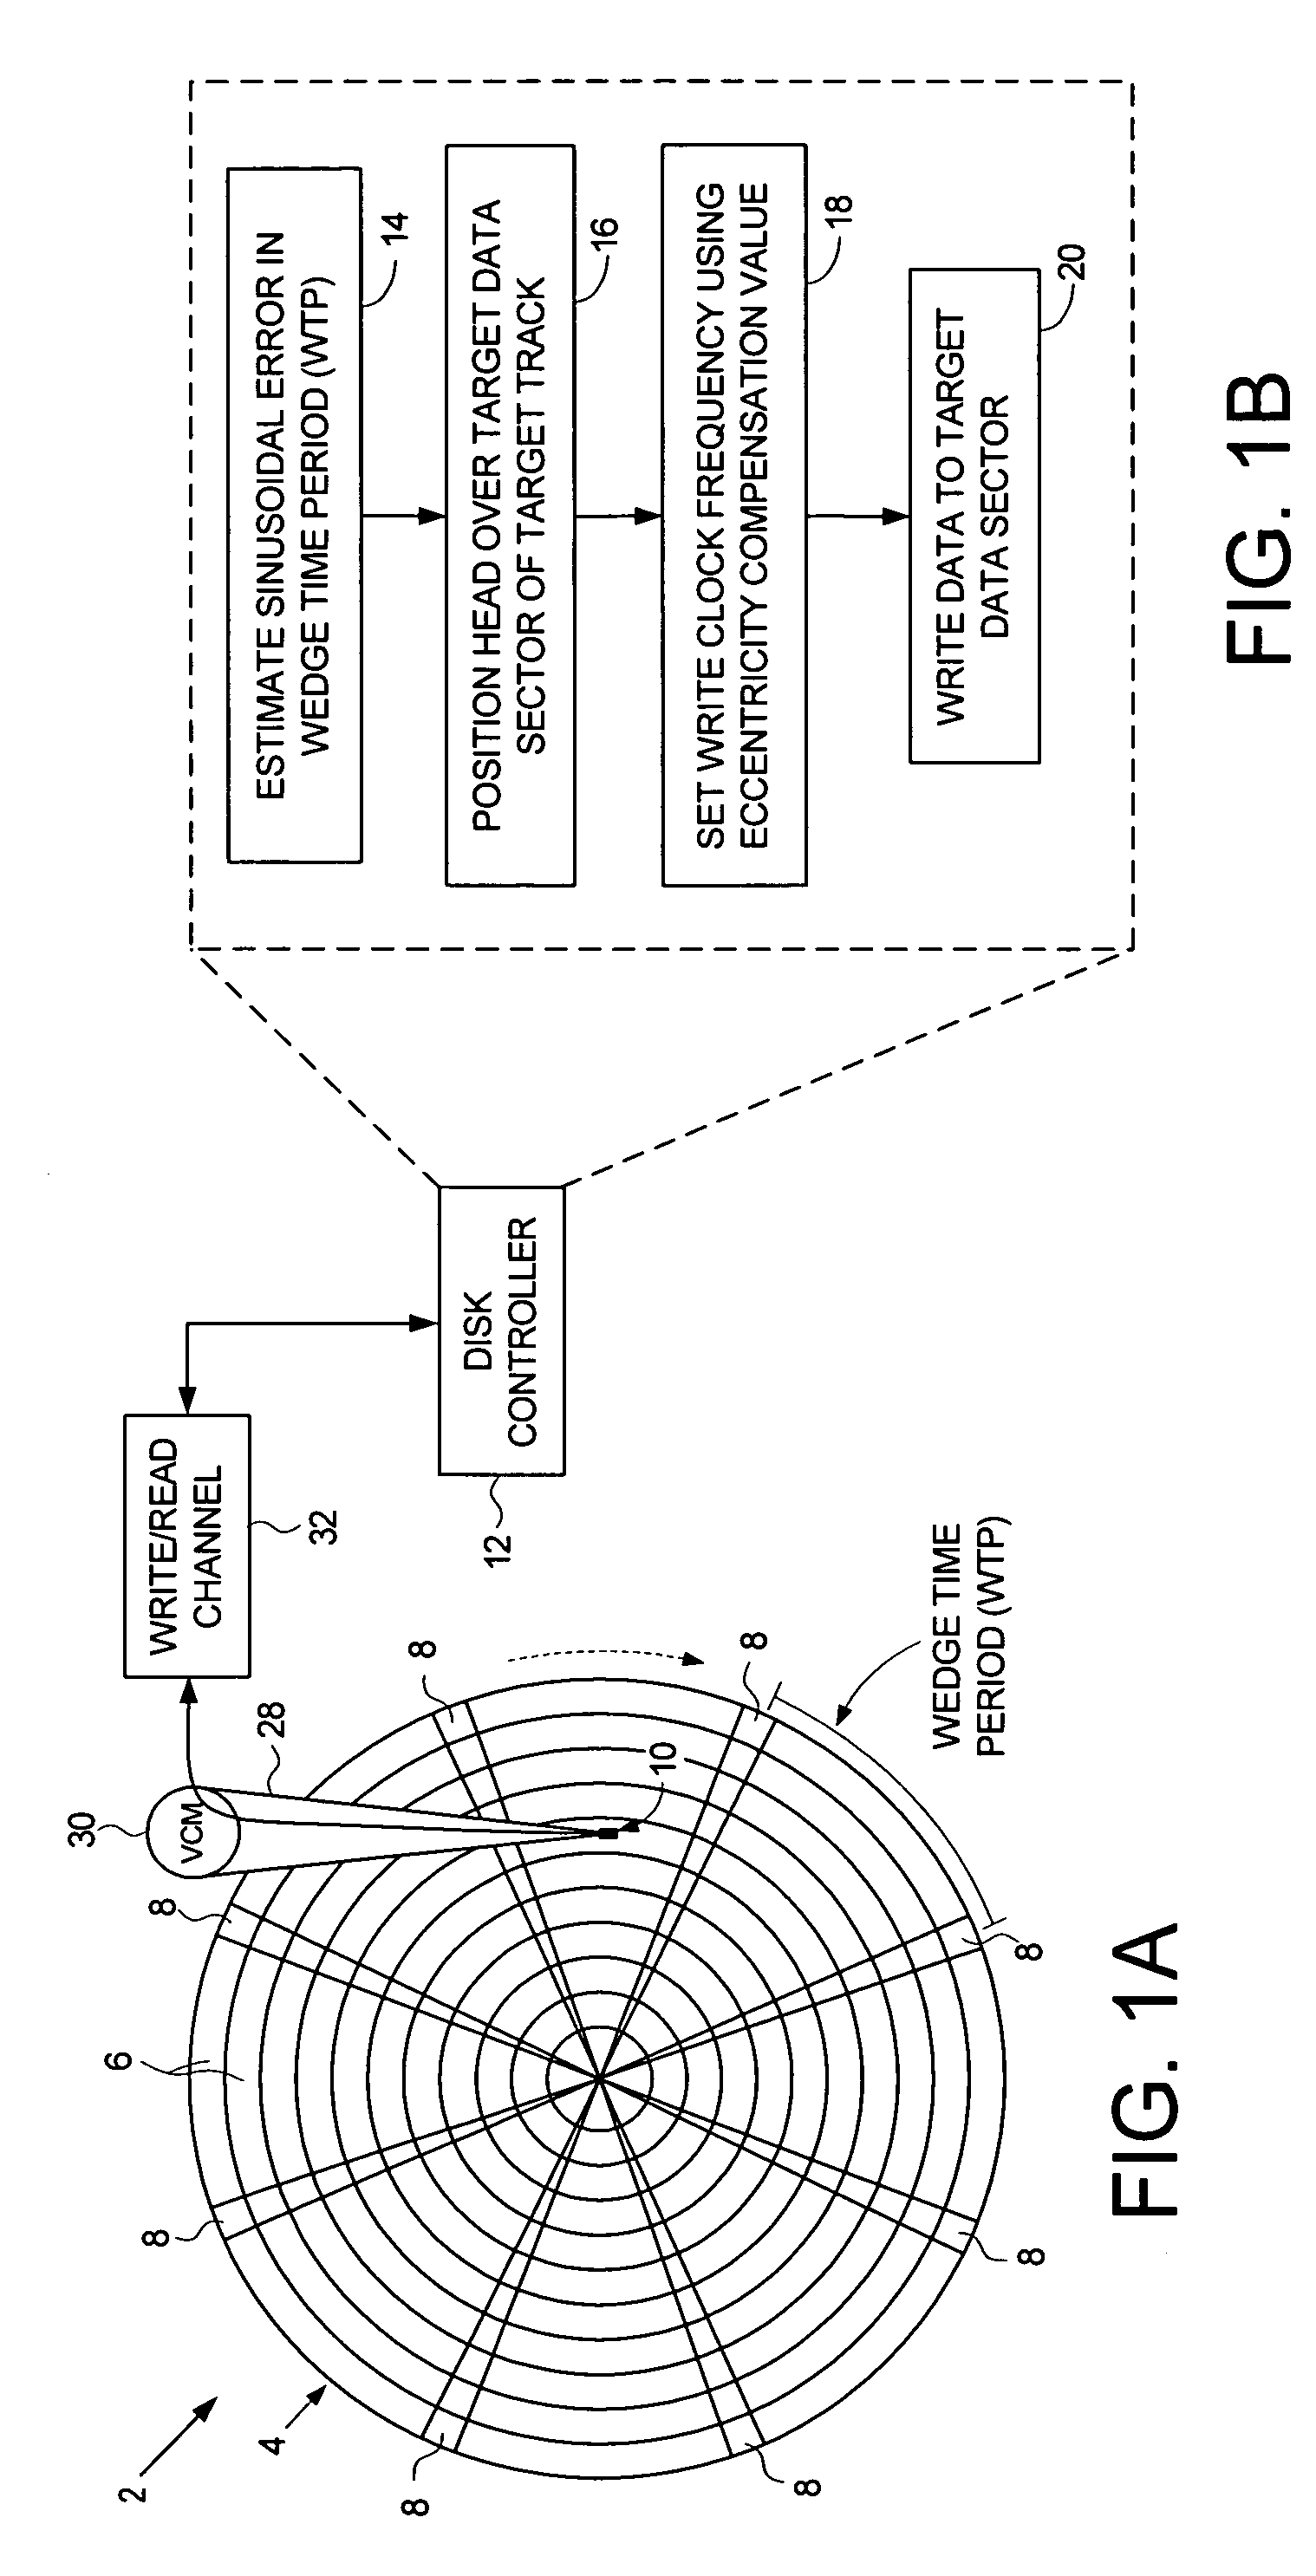 Disk drive adjusting write clock frequency to compensate for eccentricity in disk rotation